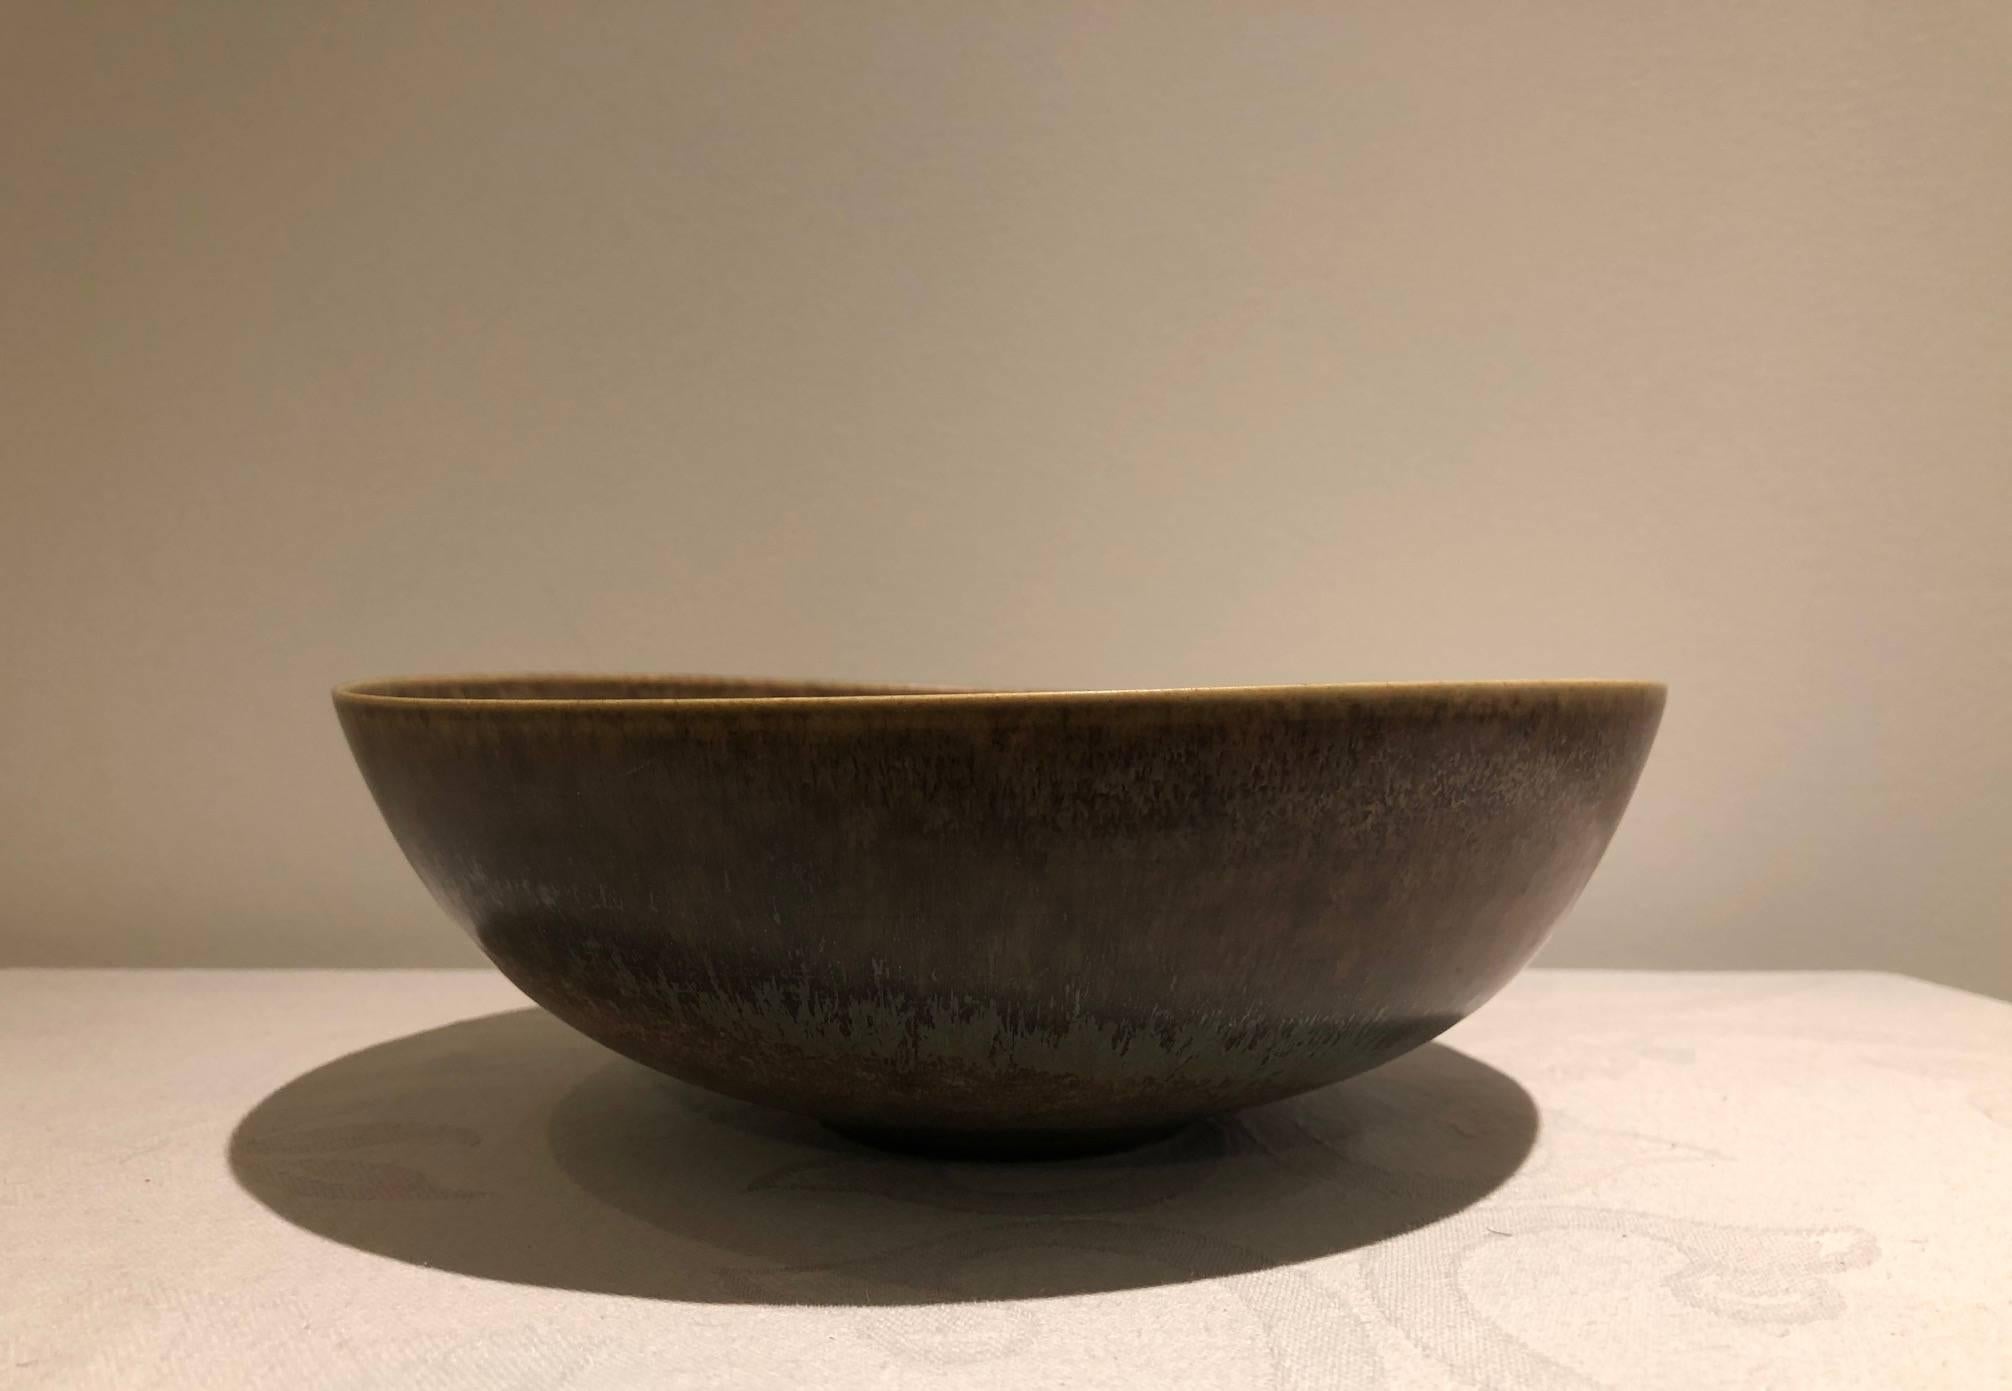 Unique Stoneware Bowl with Engraved Fishes by Stig Lindberg for Gustavsberg 1